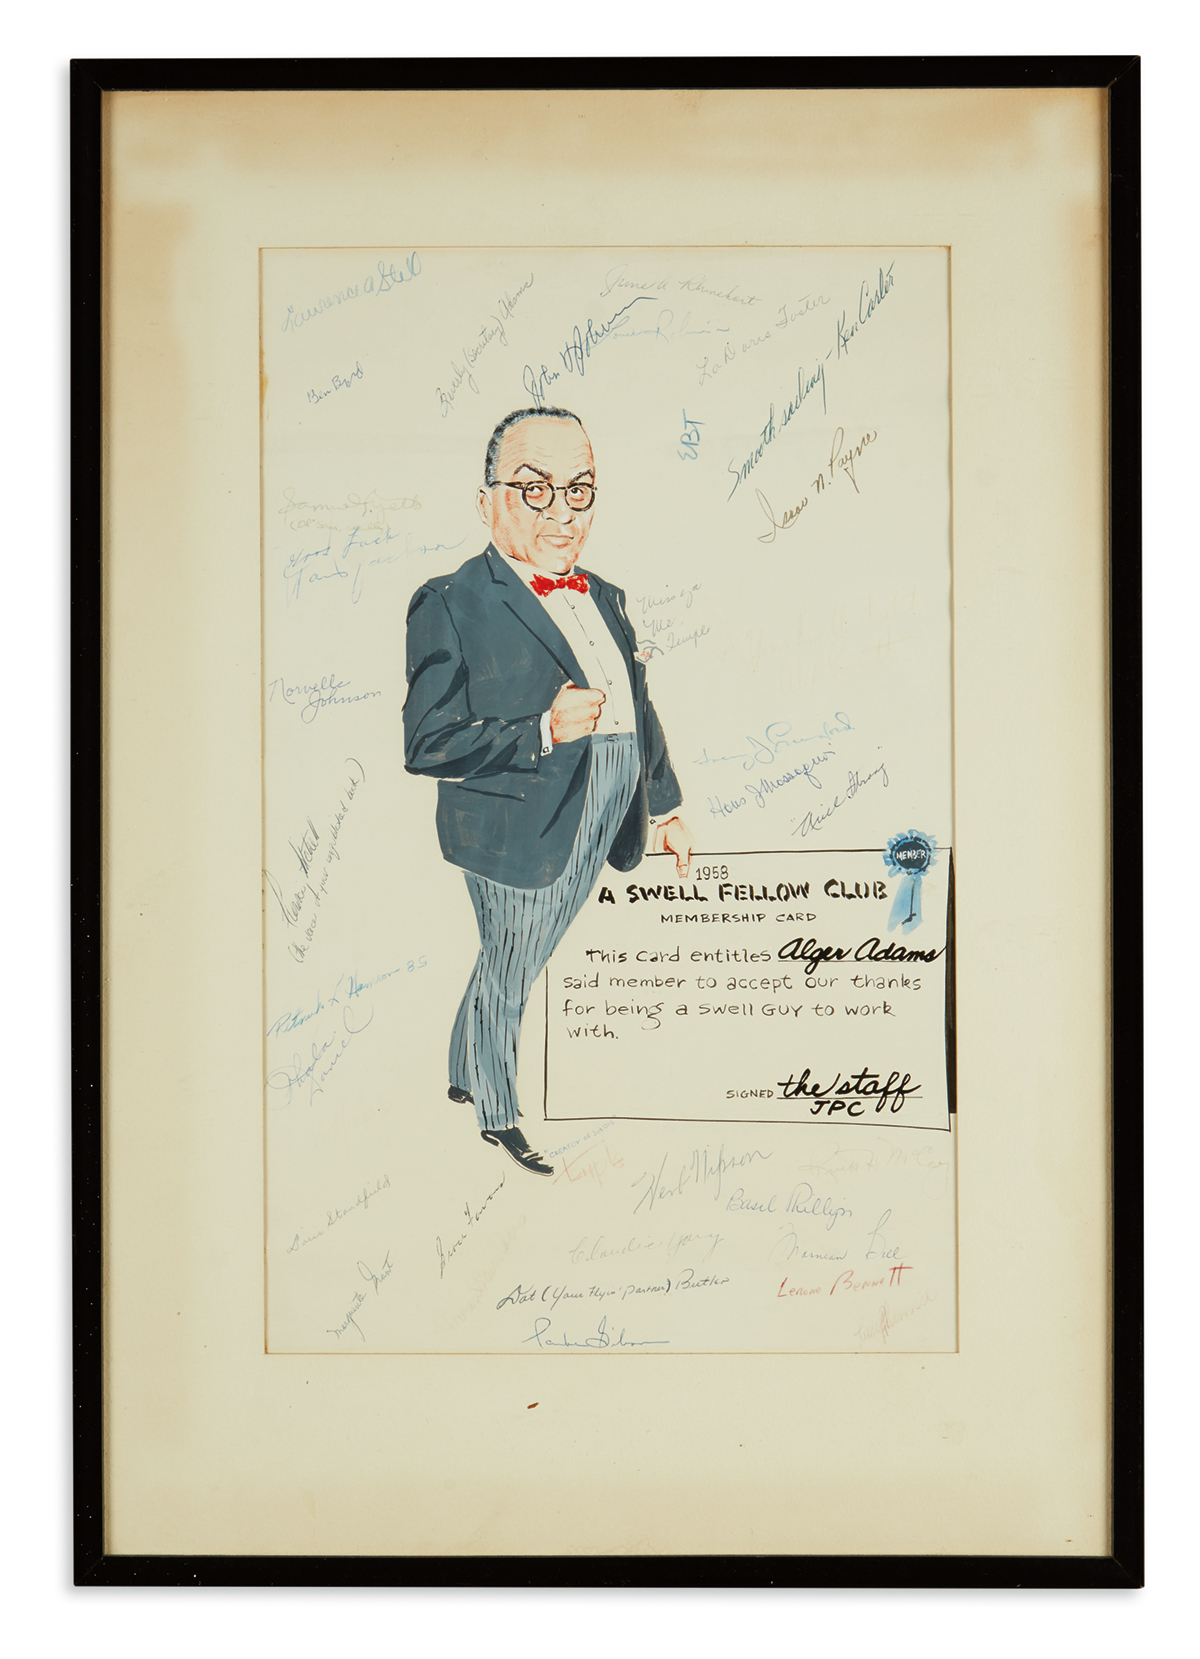 (BUSINESS.) Papers of editor Alger Adams, including a caricature signed by the staff of Johnson Publishing.